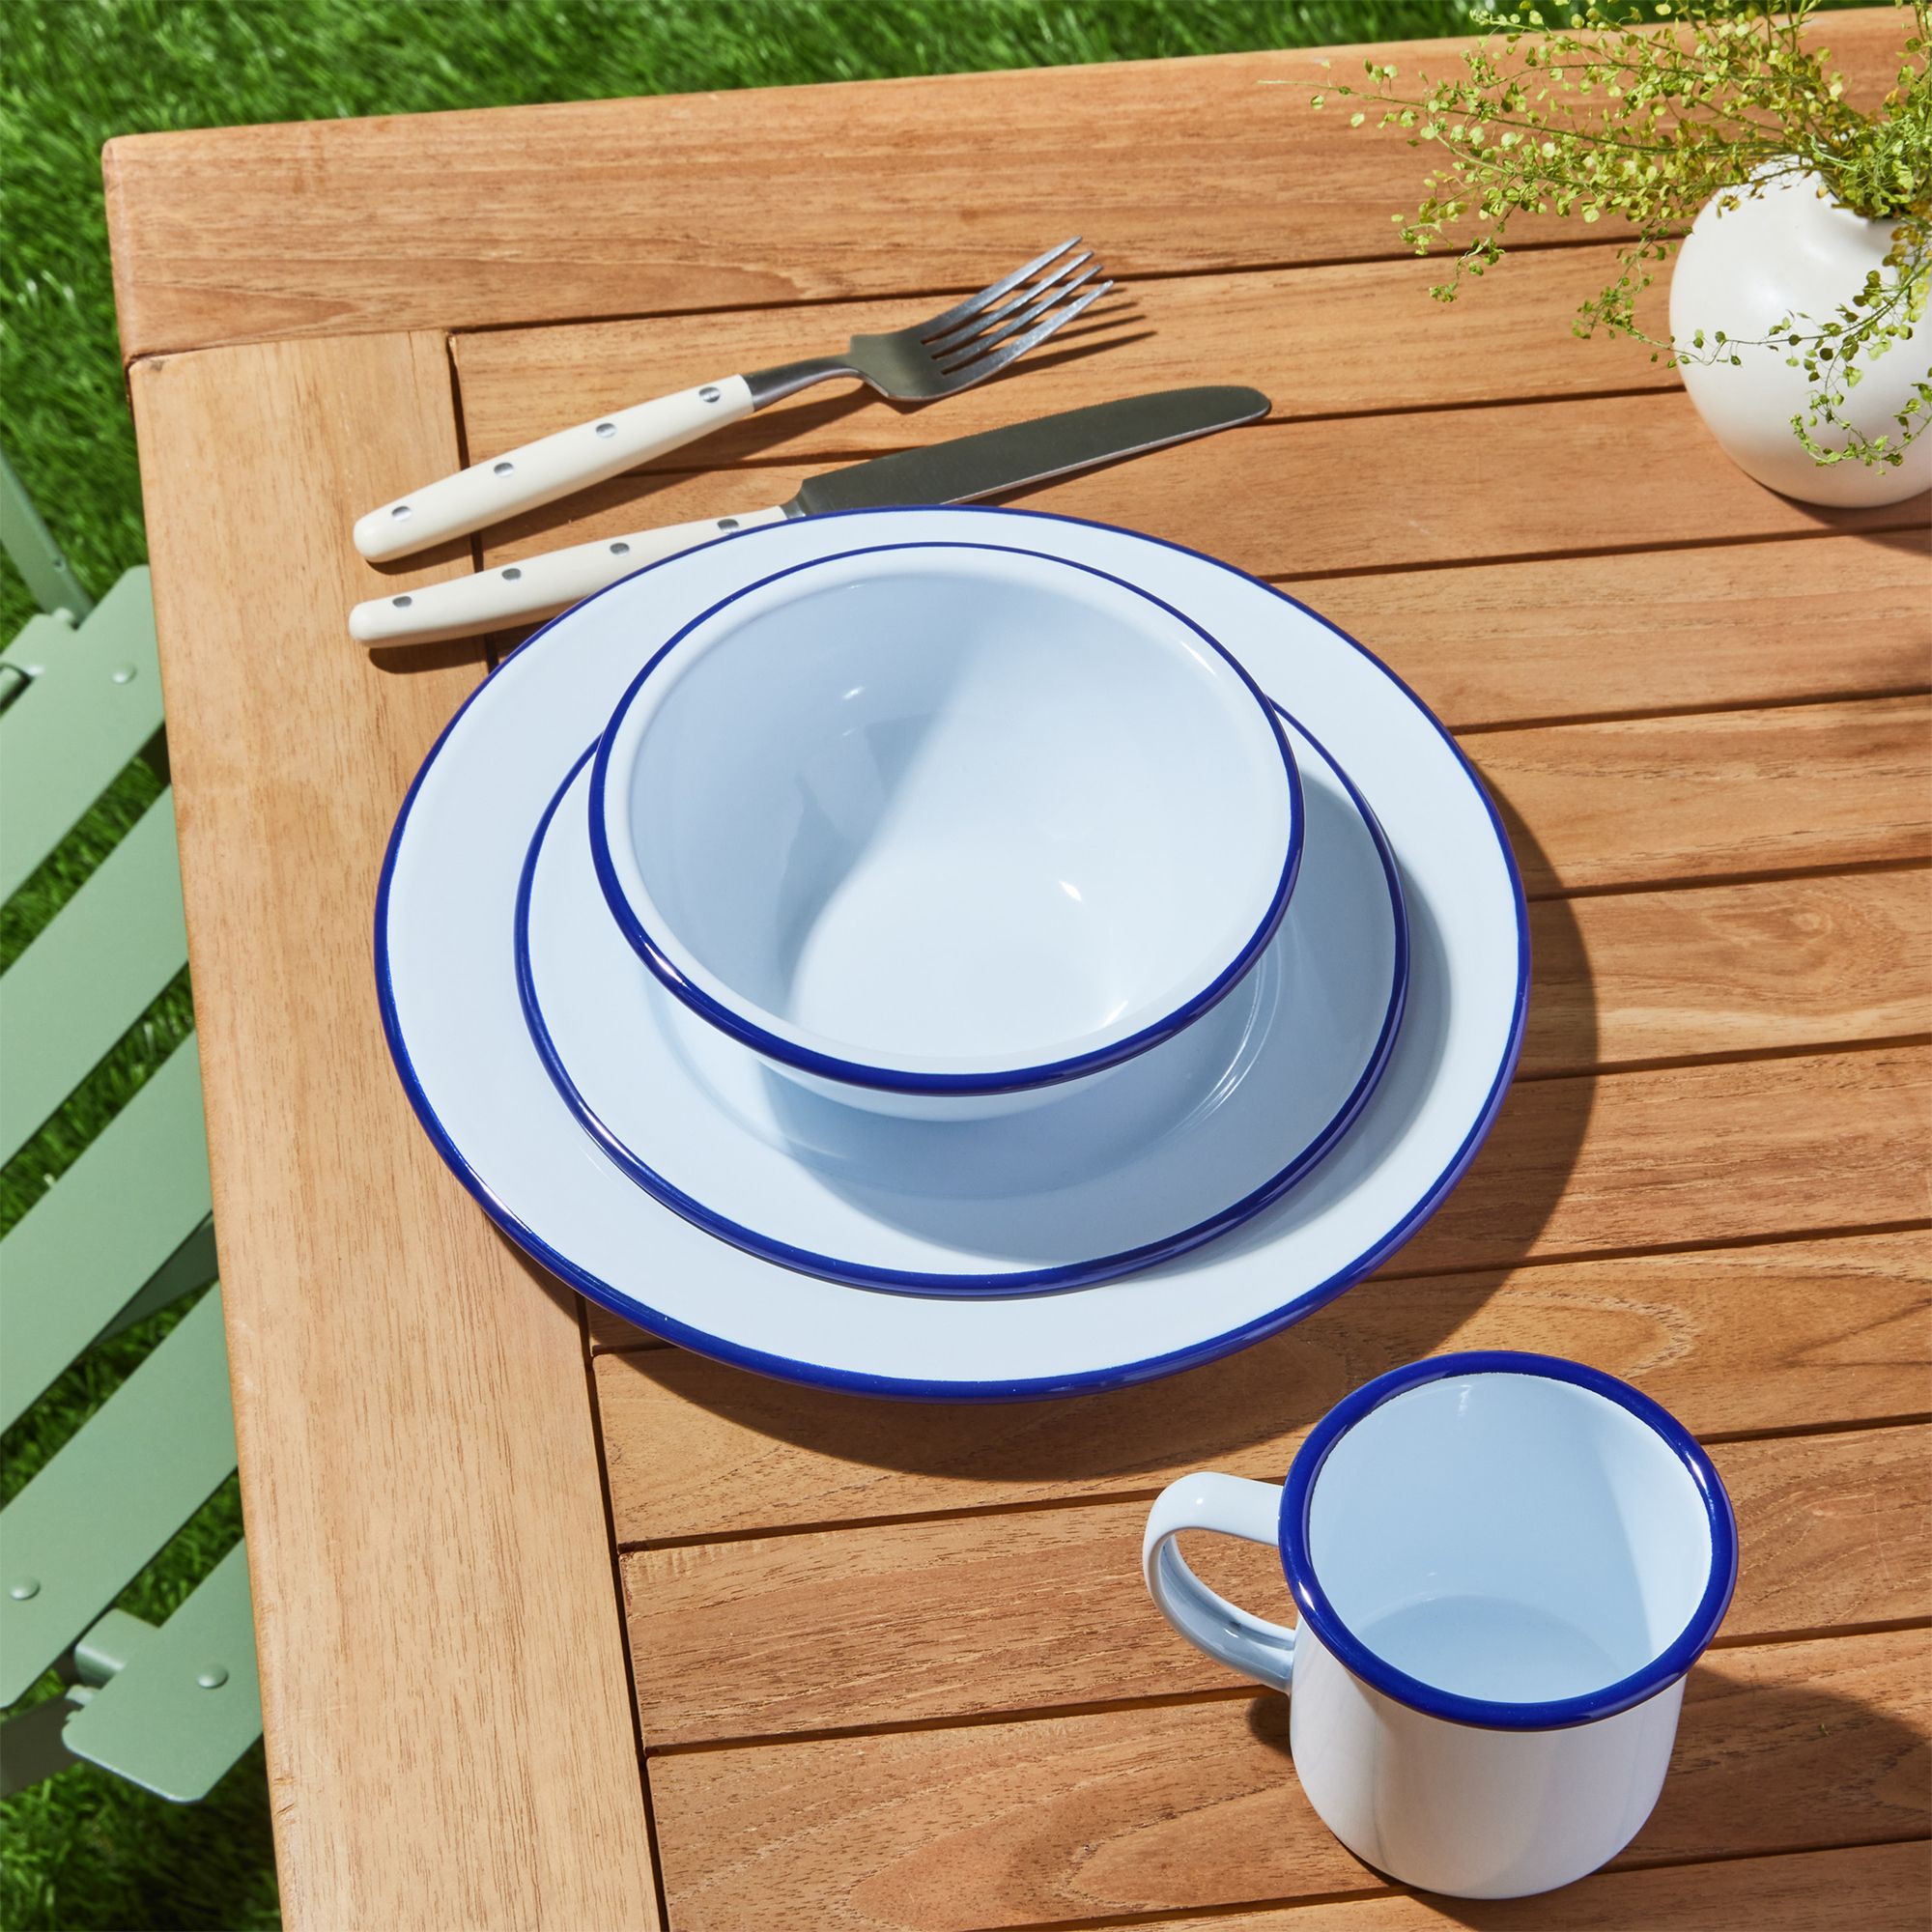 Brasserie Blue-Banded Porcelain Dinnerware Collection + Place Setting